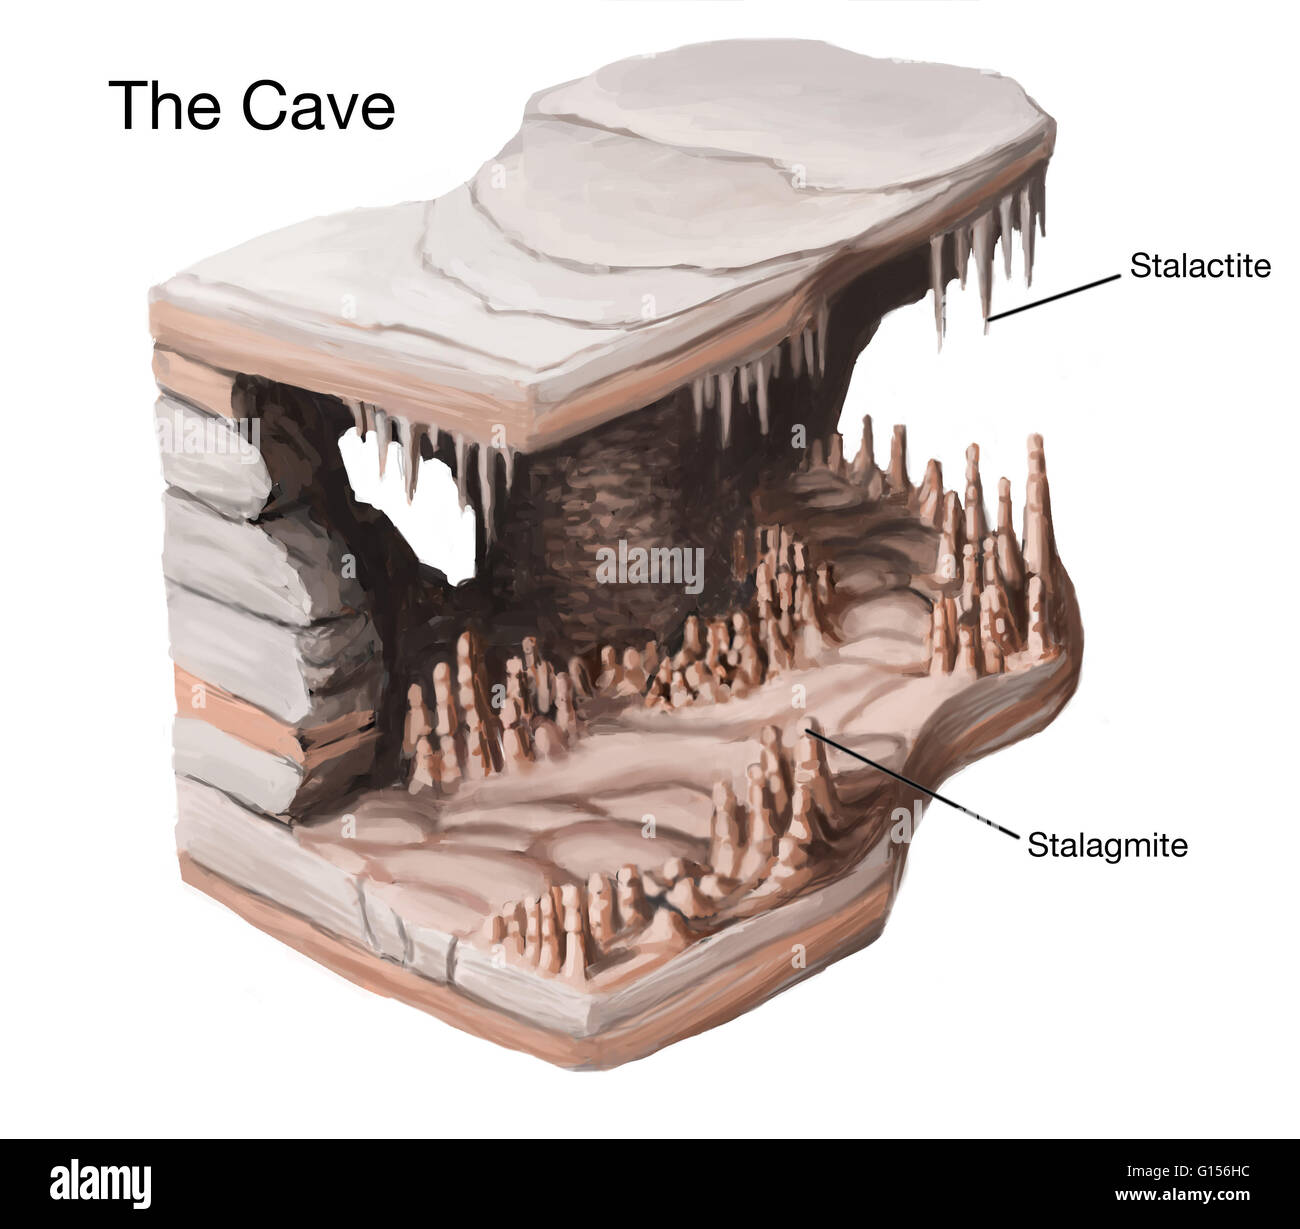 Illustration of stalactites and stalagmites in a cave. Stalactites and stalagmites are secondary cave formations that form when dissolved calcium minerals are precipitated out of solution. Stalactites form from drips of groundwater on the ceiling of caves Stock Photo